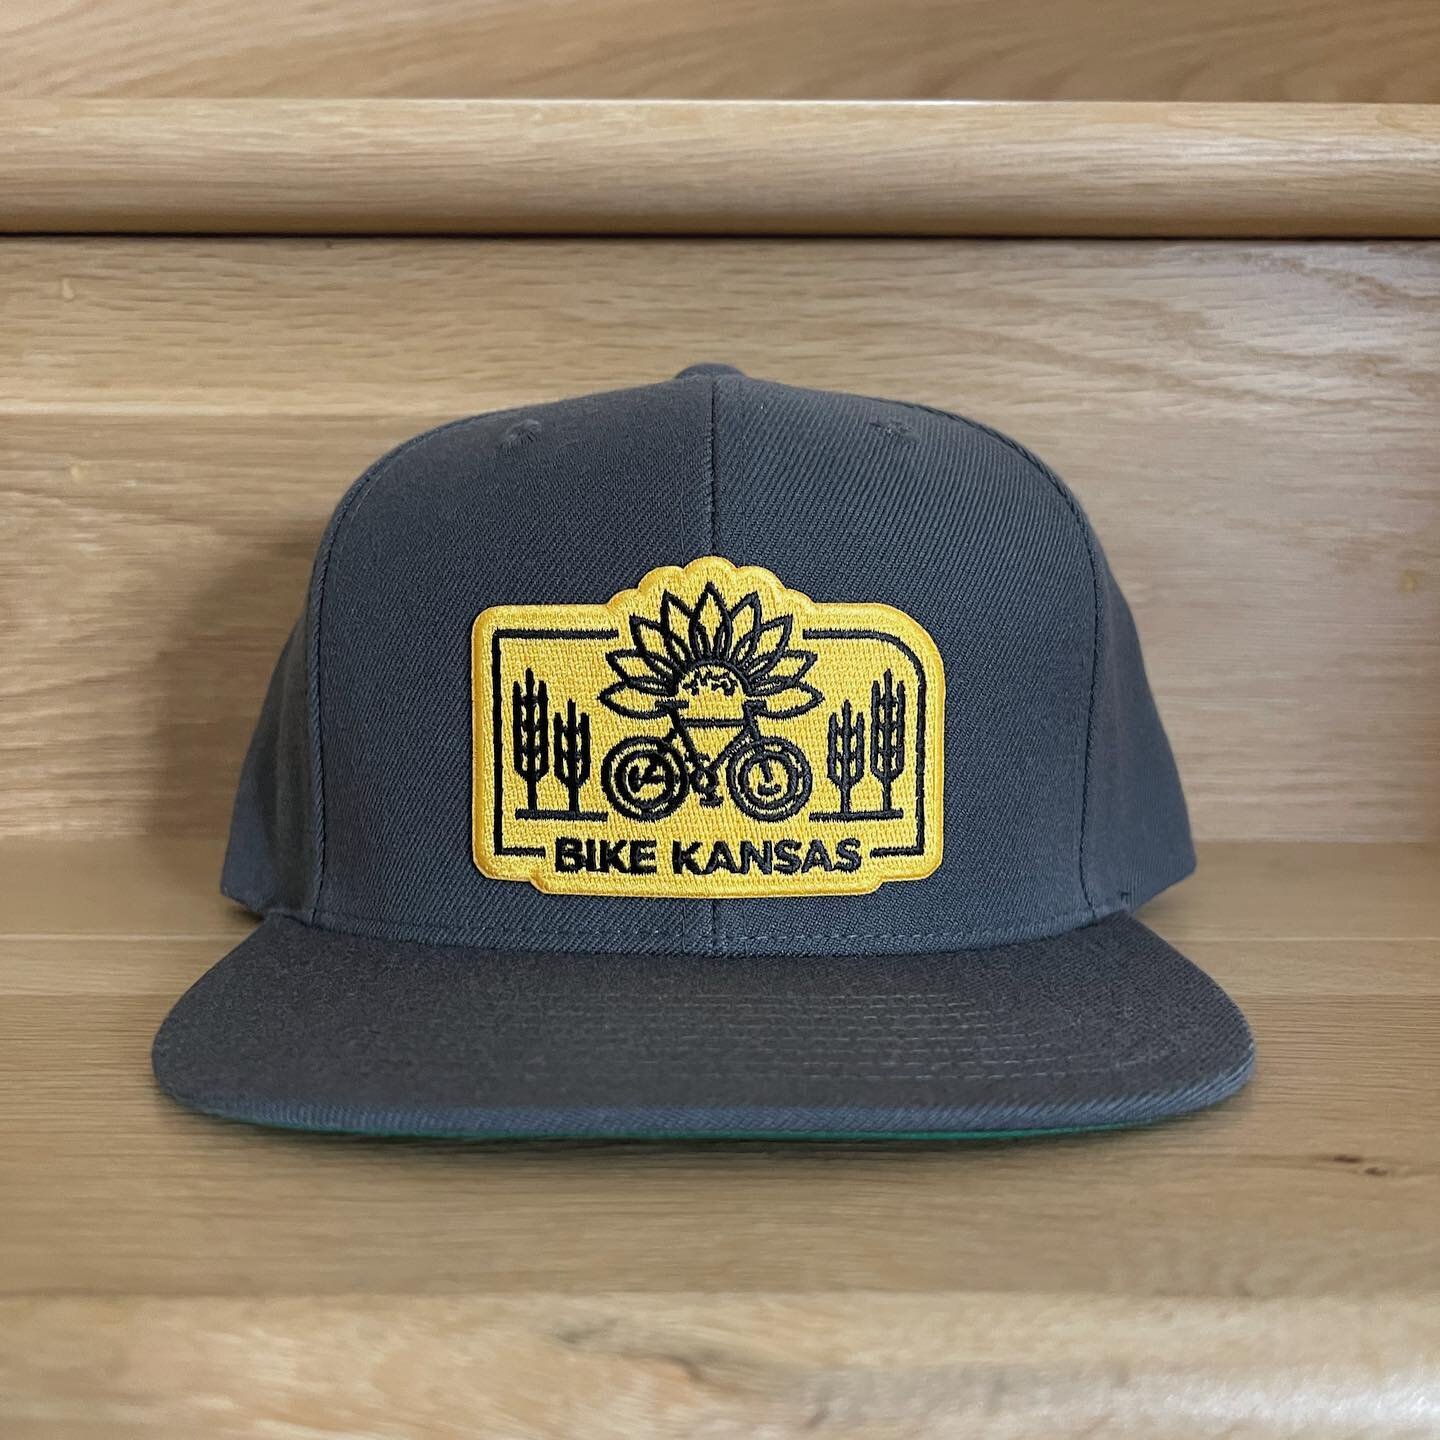 BIKE KANSAS 🚴🏼🌻✌🏽
&mdash;
New Kinfolk lids featuring our 100% recycled plastic patches! #bikekansas
&mdash;
So excited to share all of our new Kansas products! 😊
&mdash;
#kinfolkcreated #kansas #bikelife #patch #lovewhereyoulive #explorekansas #